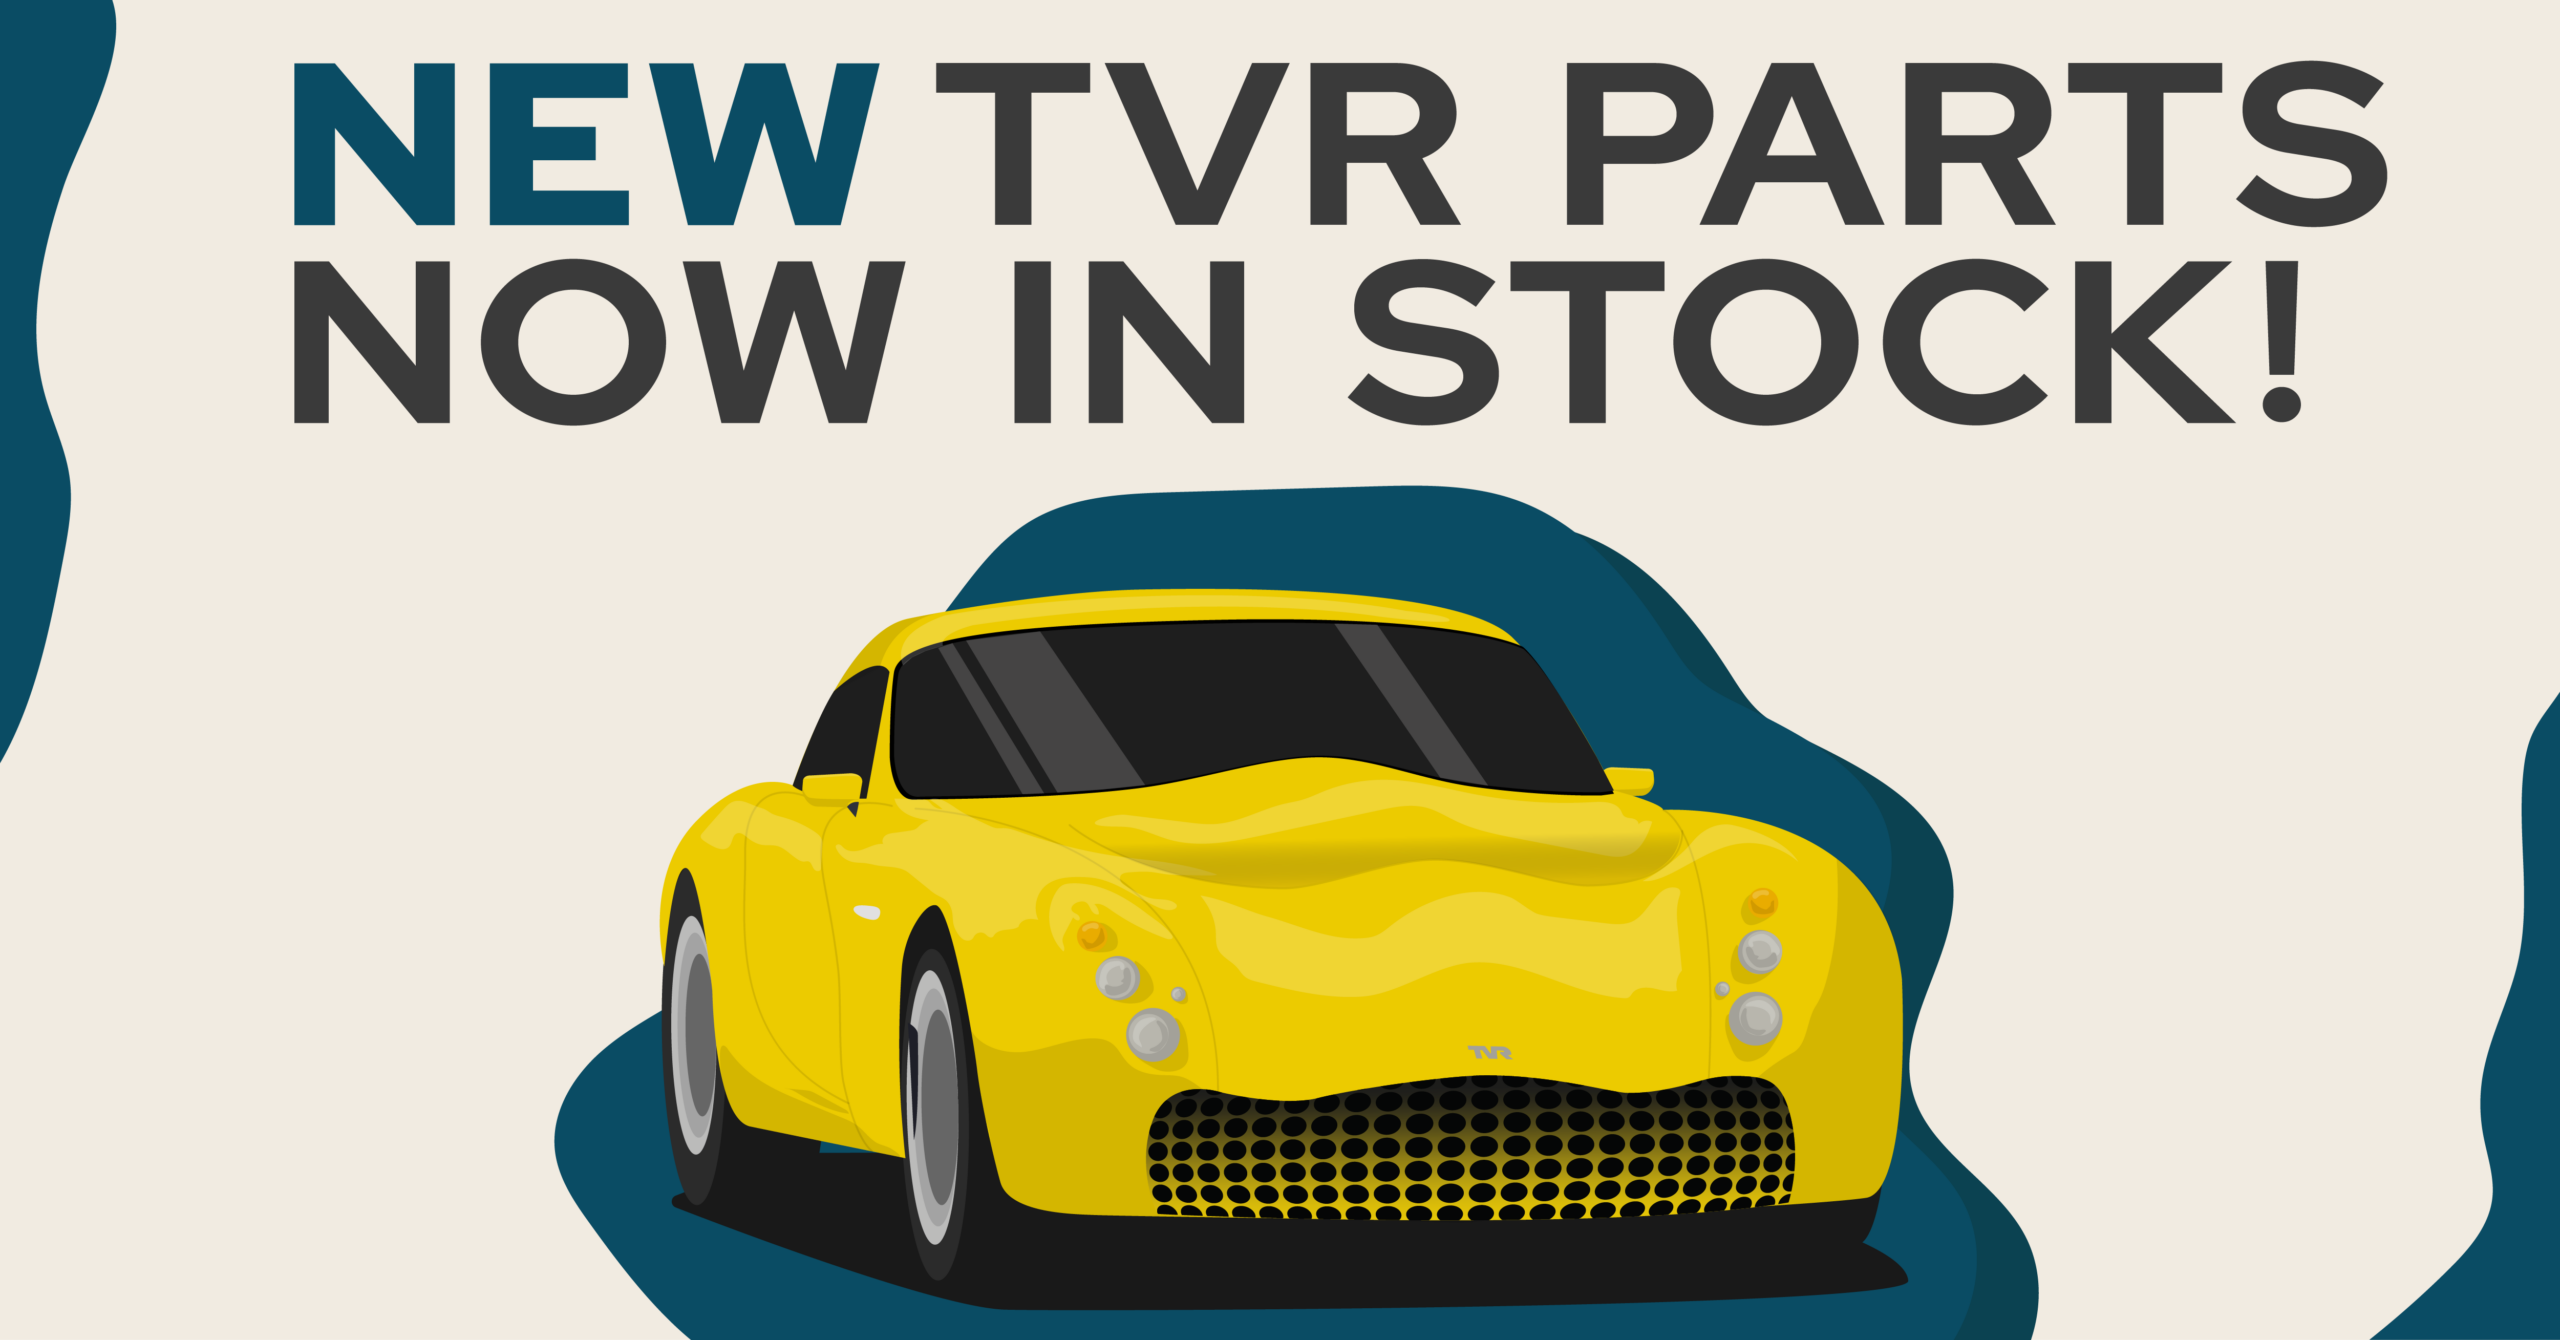 New TVR Parts Now In Stock